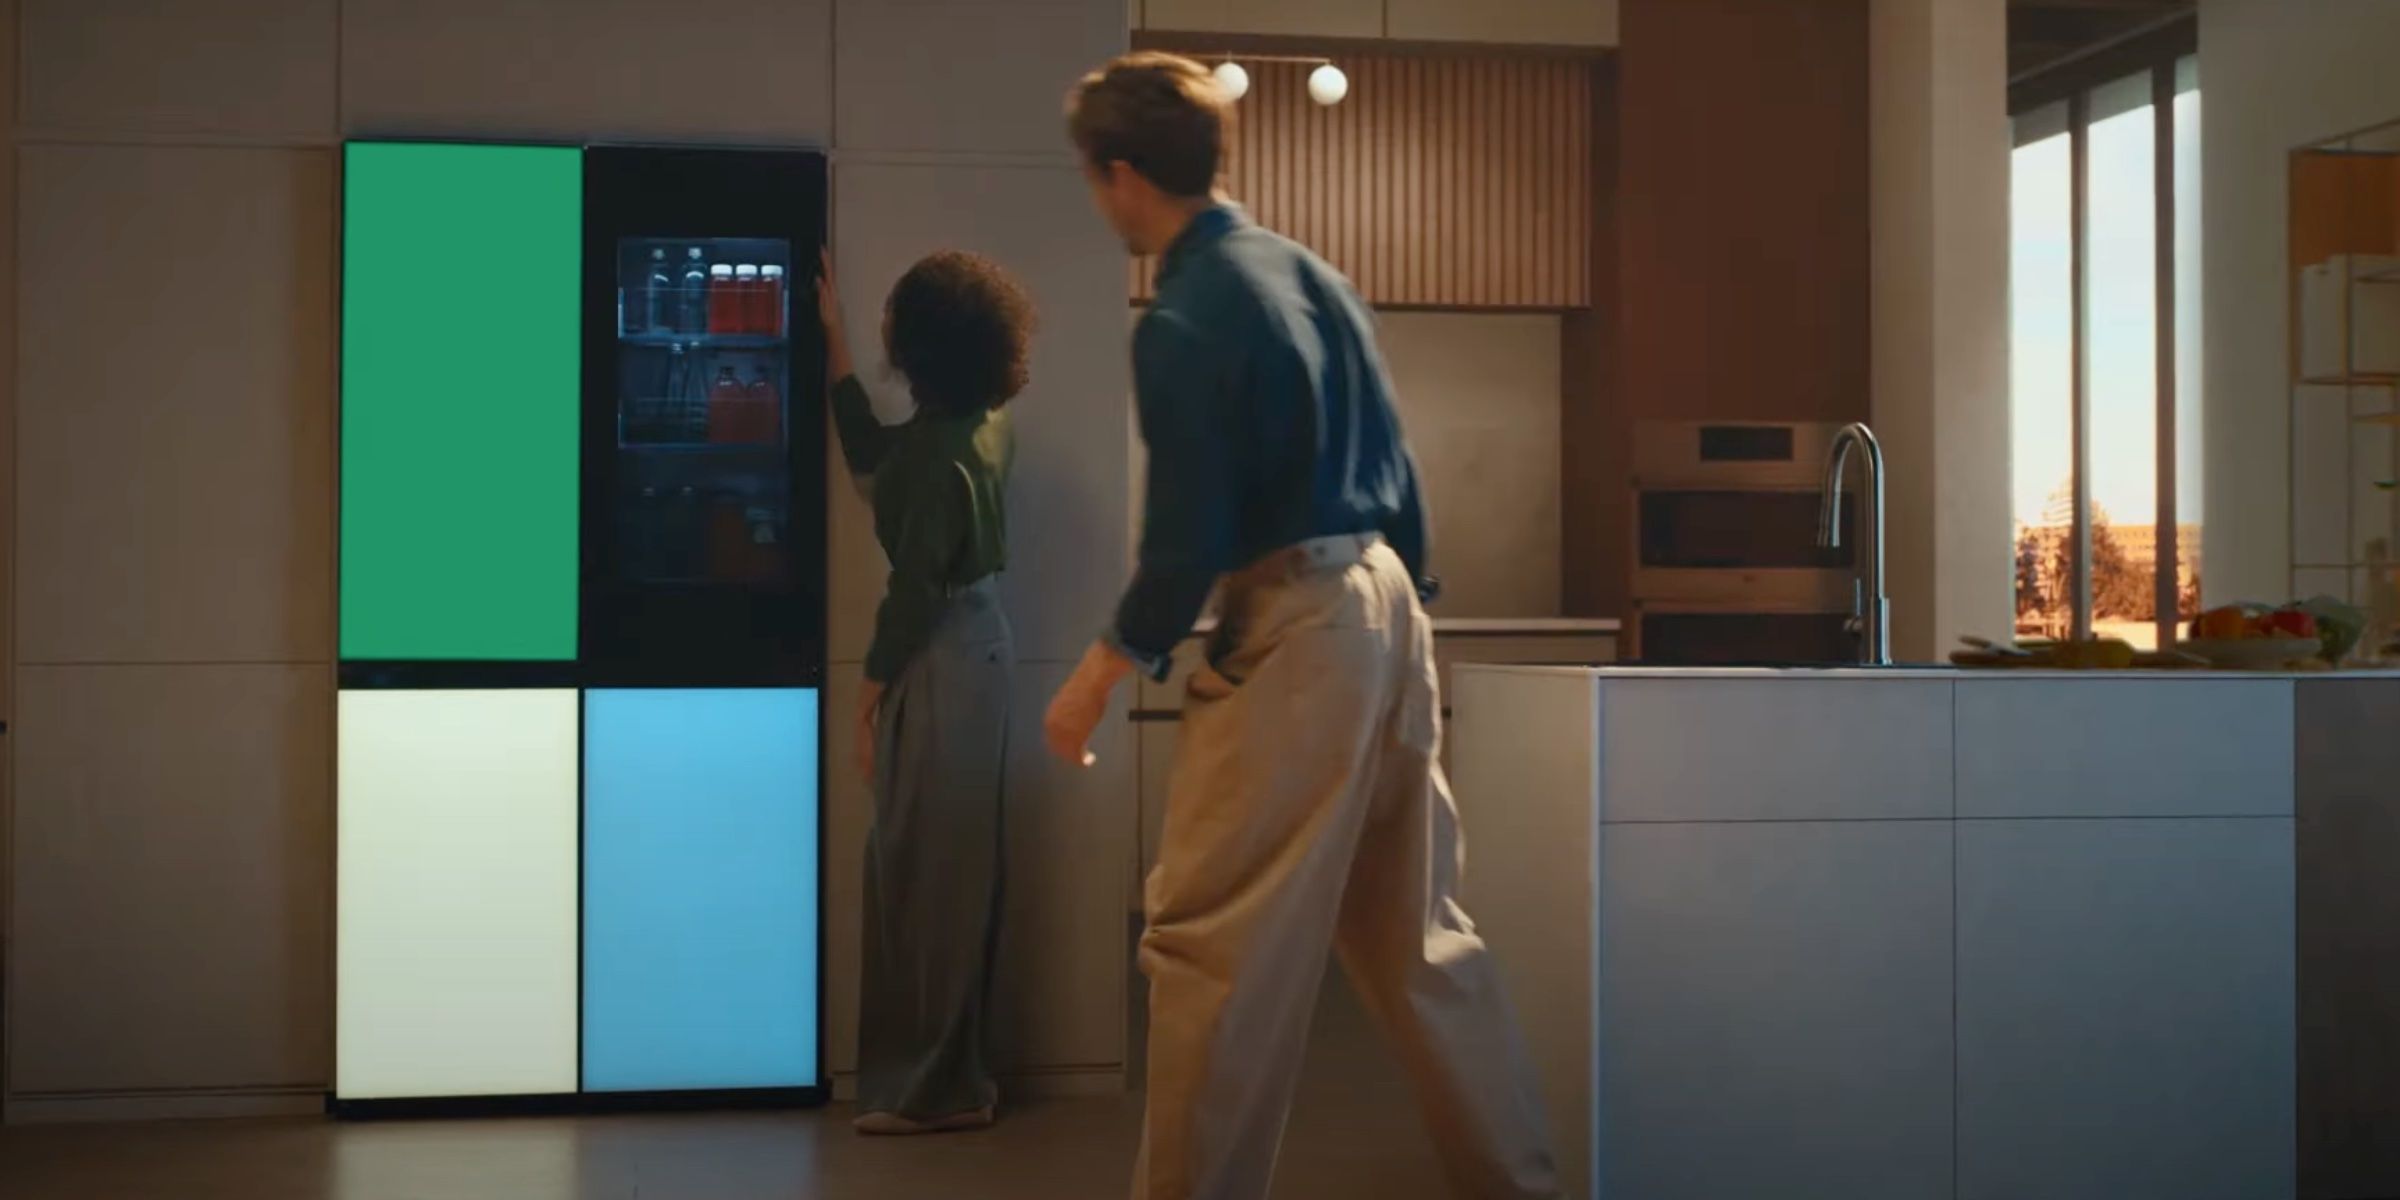 LG's MoodUp fridge in a kitchen, changing the color LEDs on each panel.